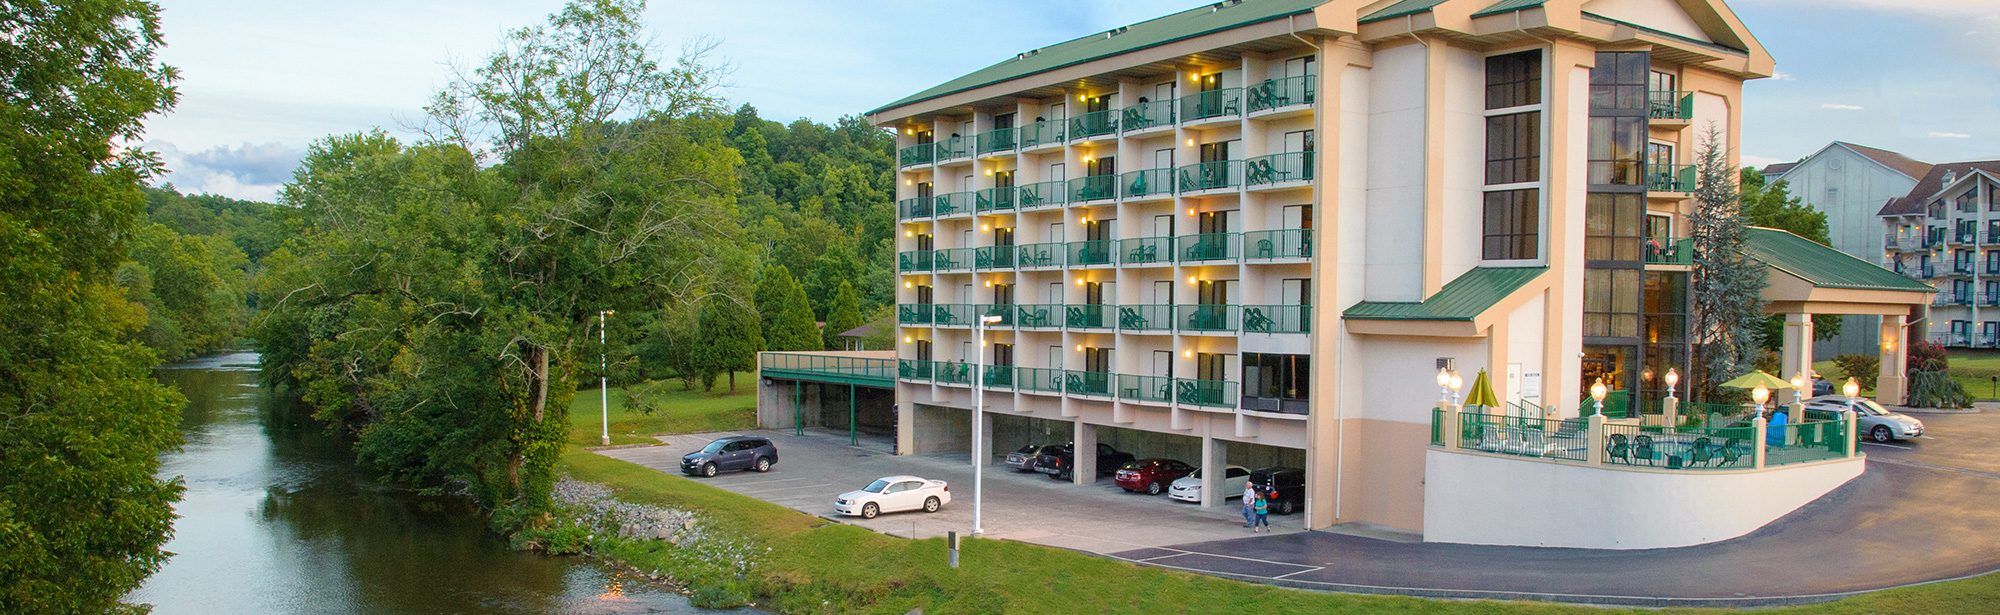 Hotel next to Pigeon River